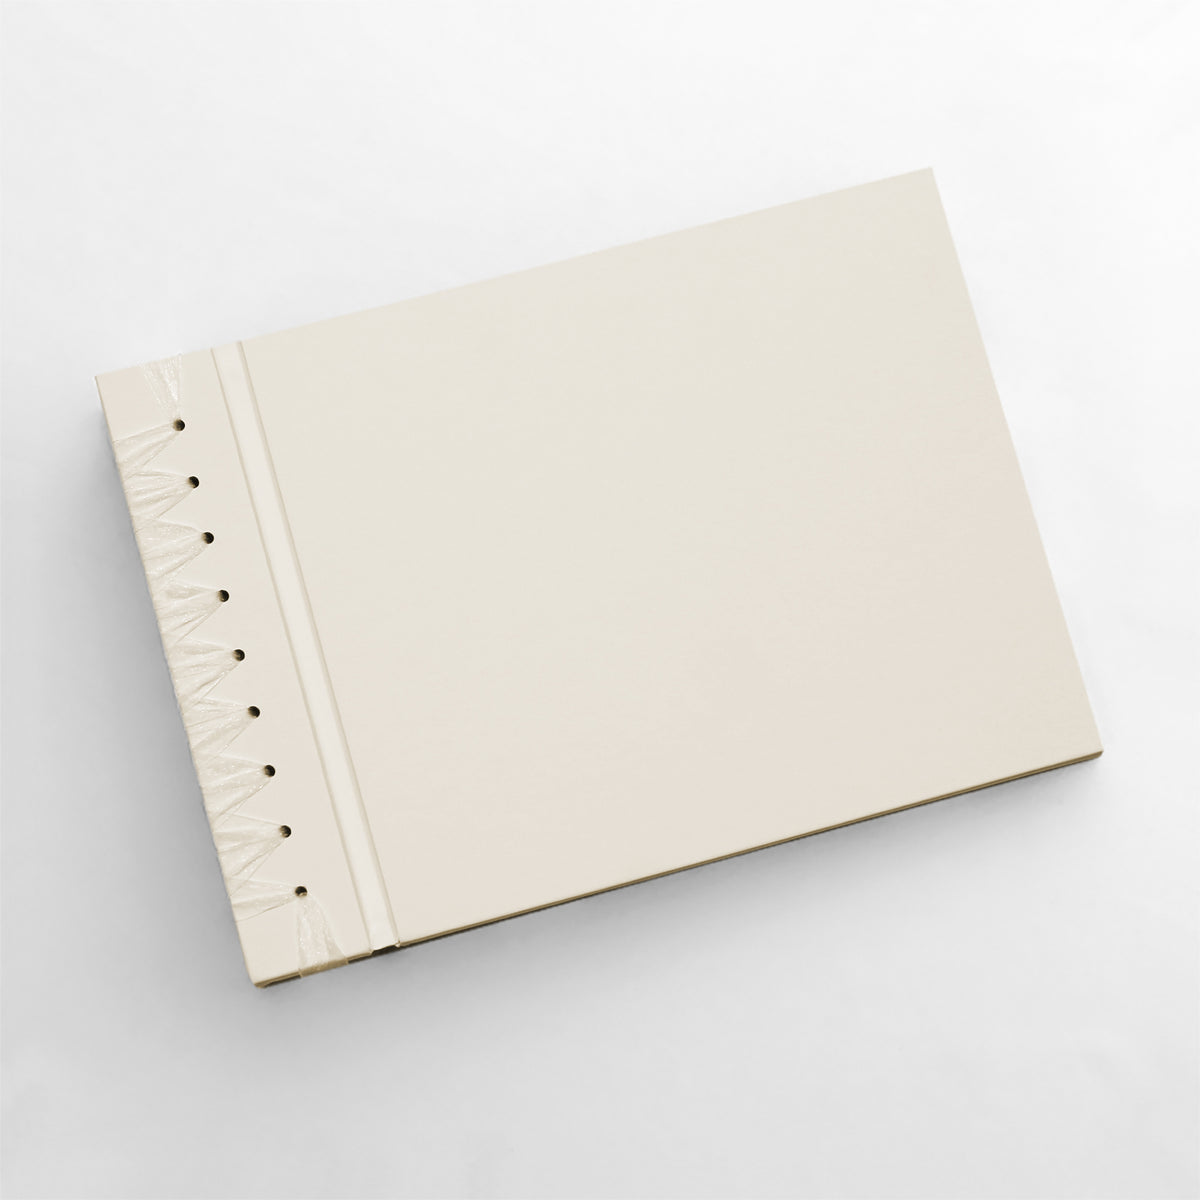 Large 10 x 15 Paper Page Album | Cover: Pearl Vegan Leather | Available Personalized